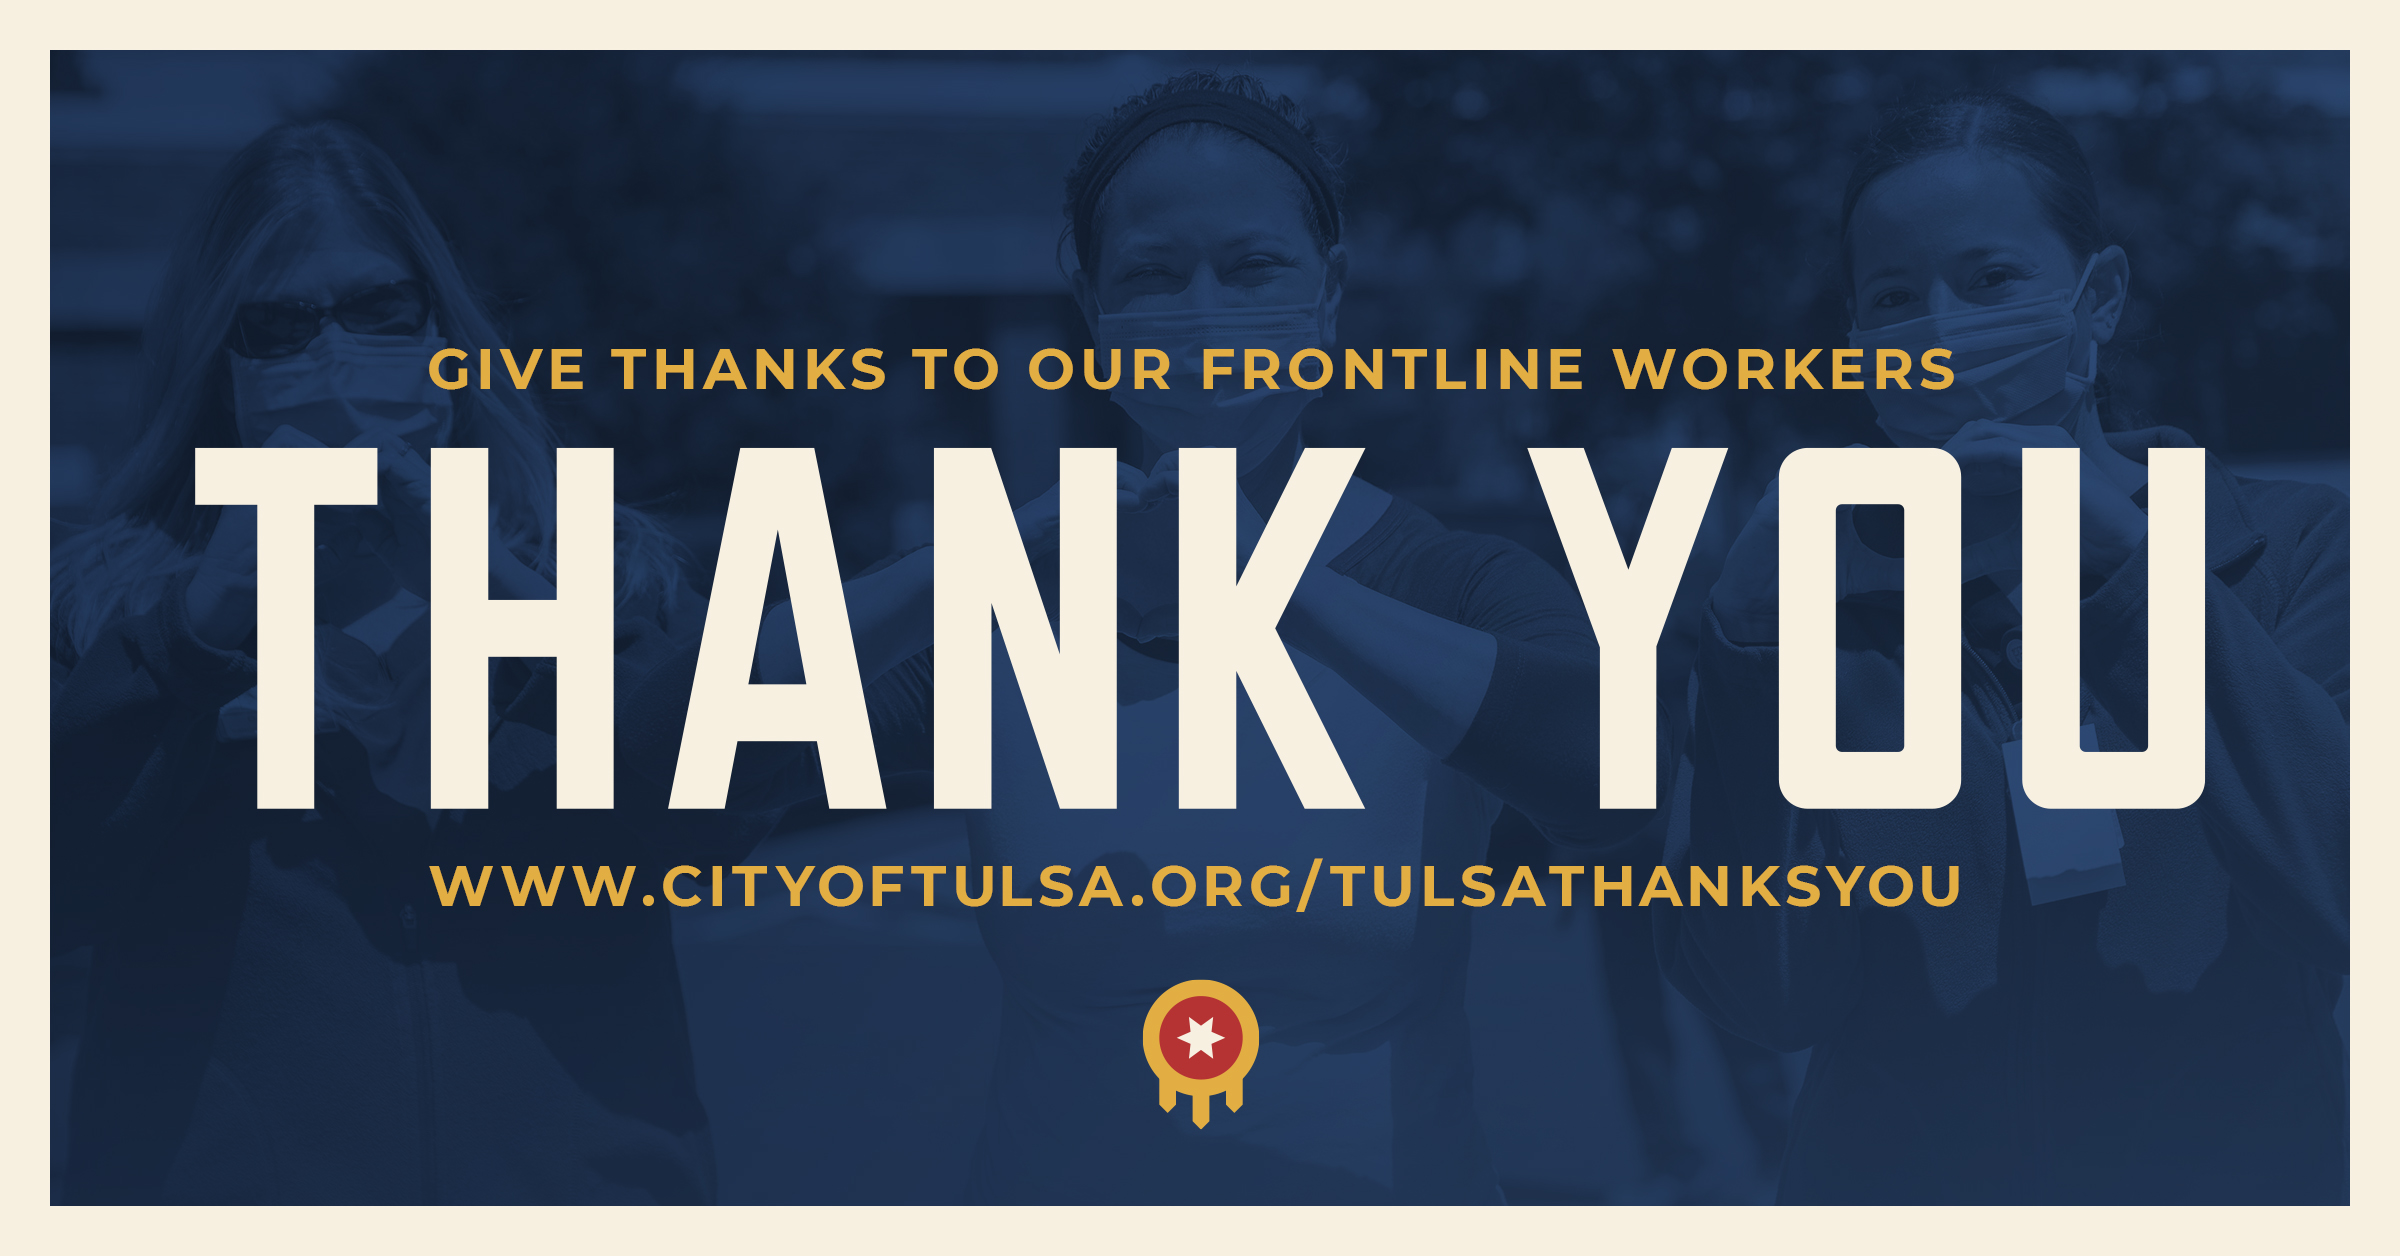 City Of Tulsa Announces 'Tulsa Thanks You' Video Project